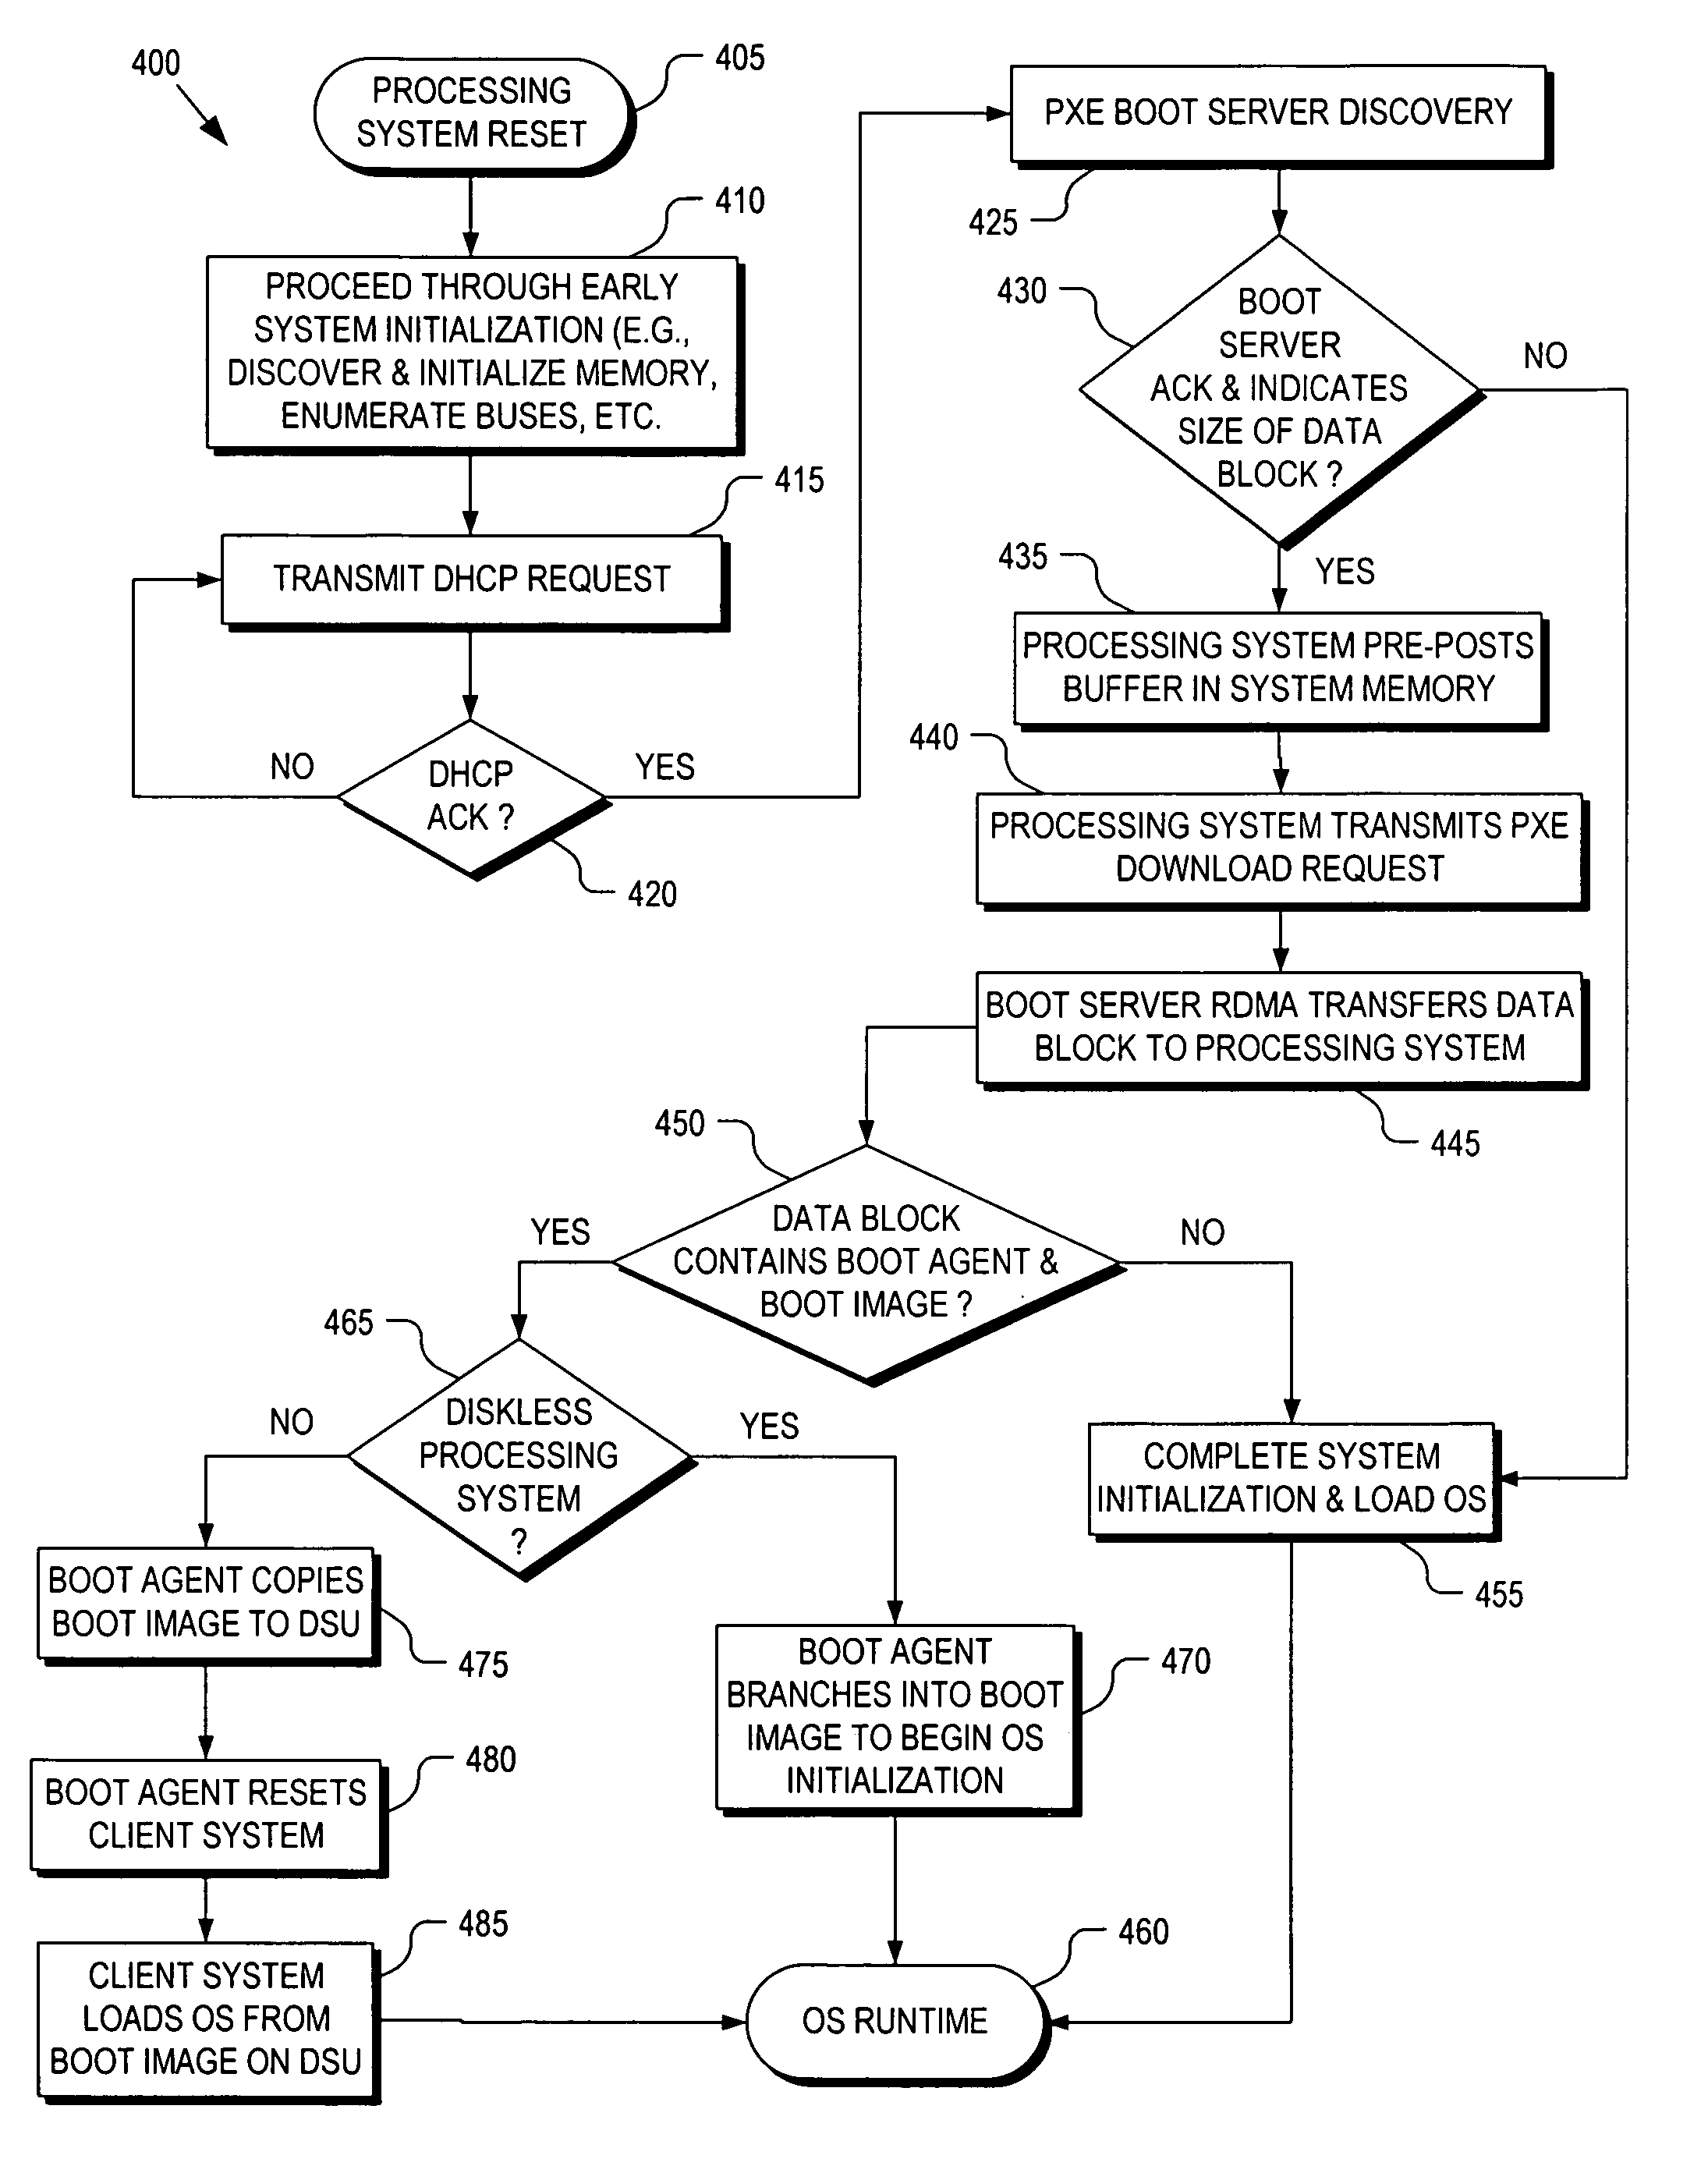 Firmware interfacing with network protocol offload engines to provide fast network booting, system repurposing, system provisioning, system manageability, and disaster recovery